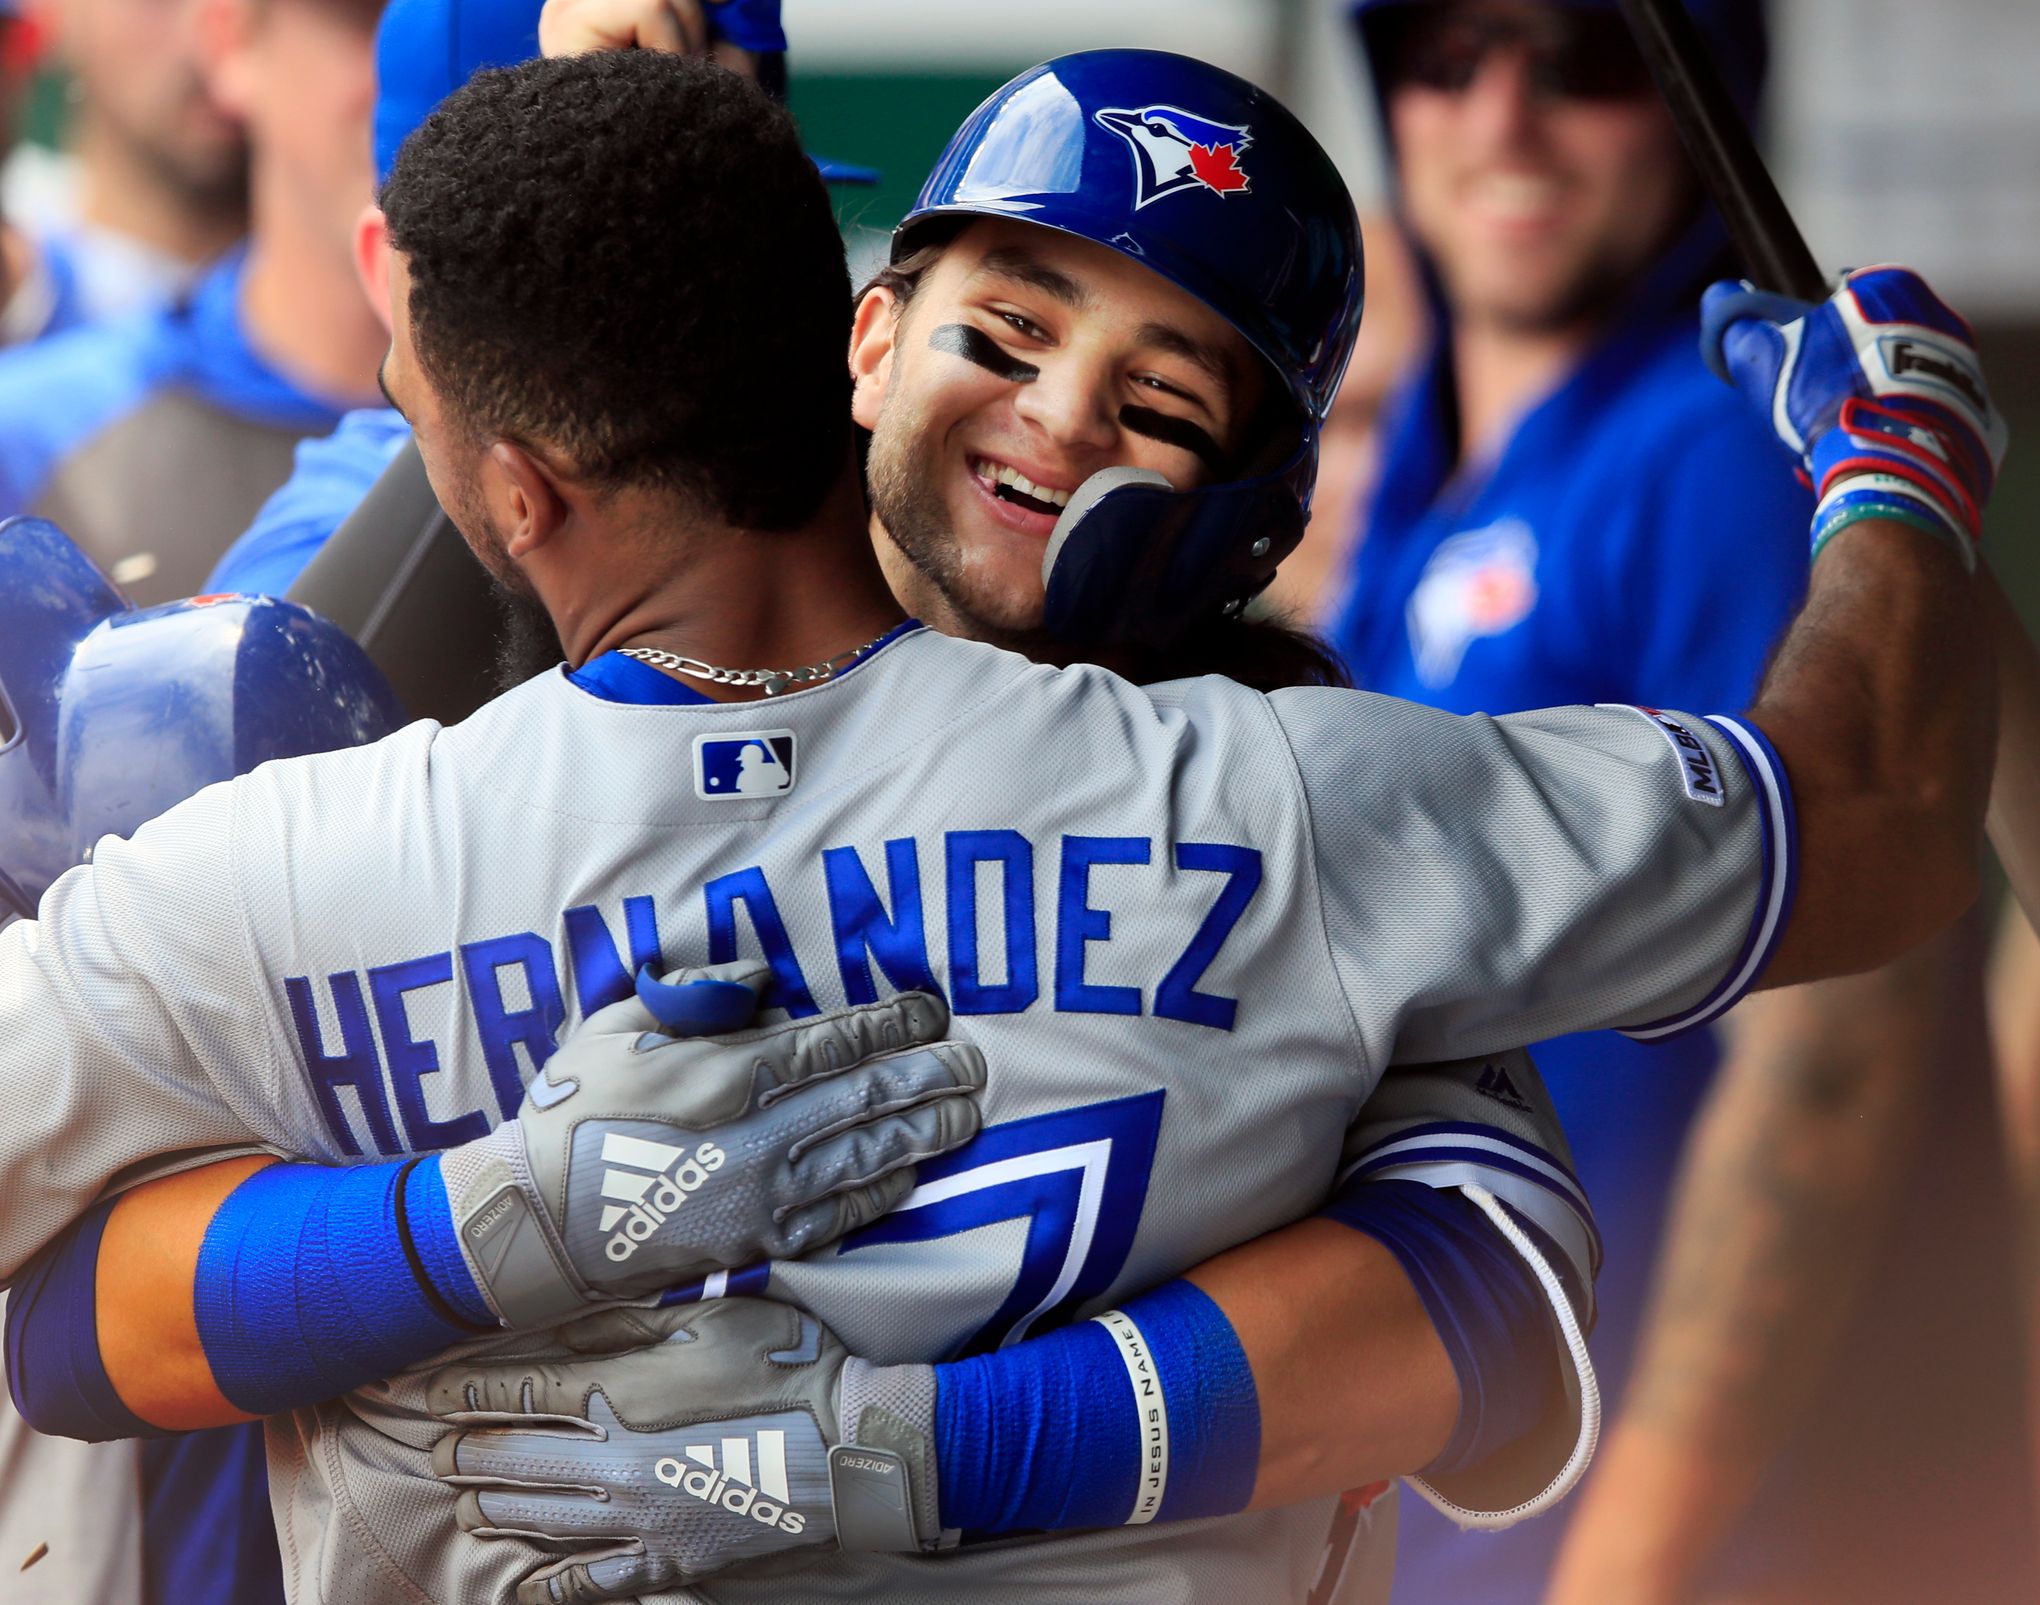 Blue Jays hold off Royals for three-game sweep